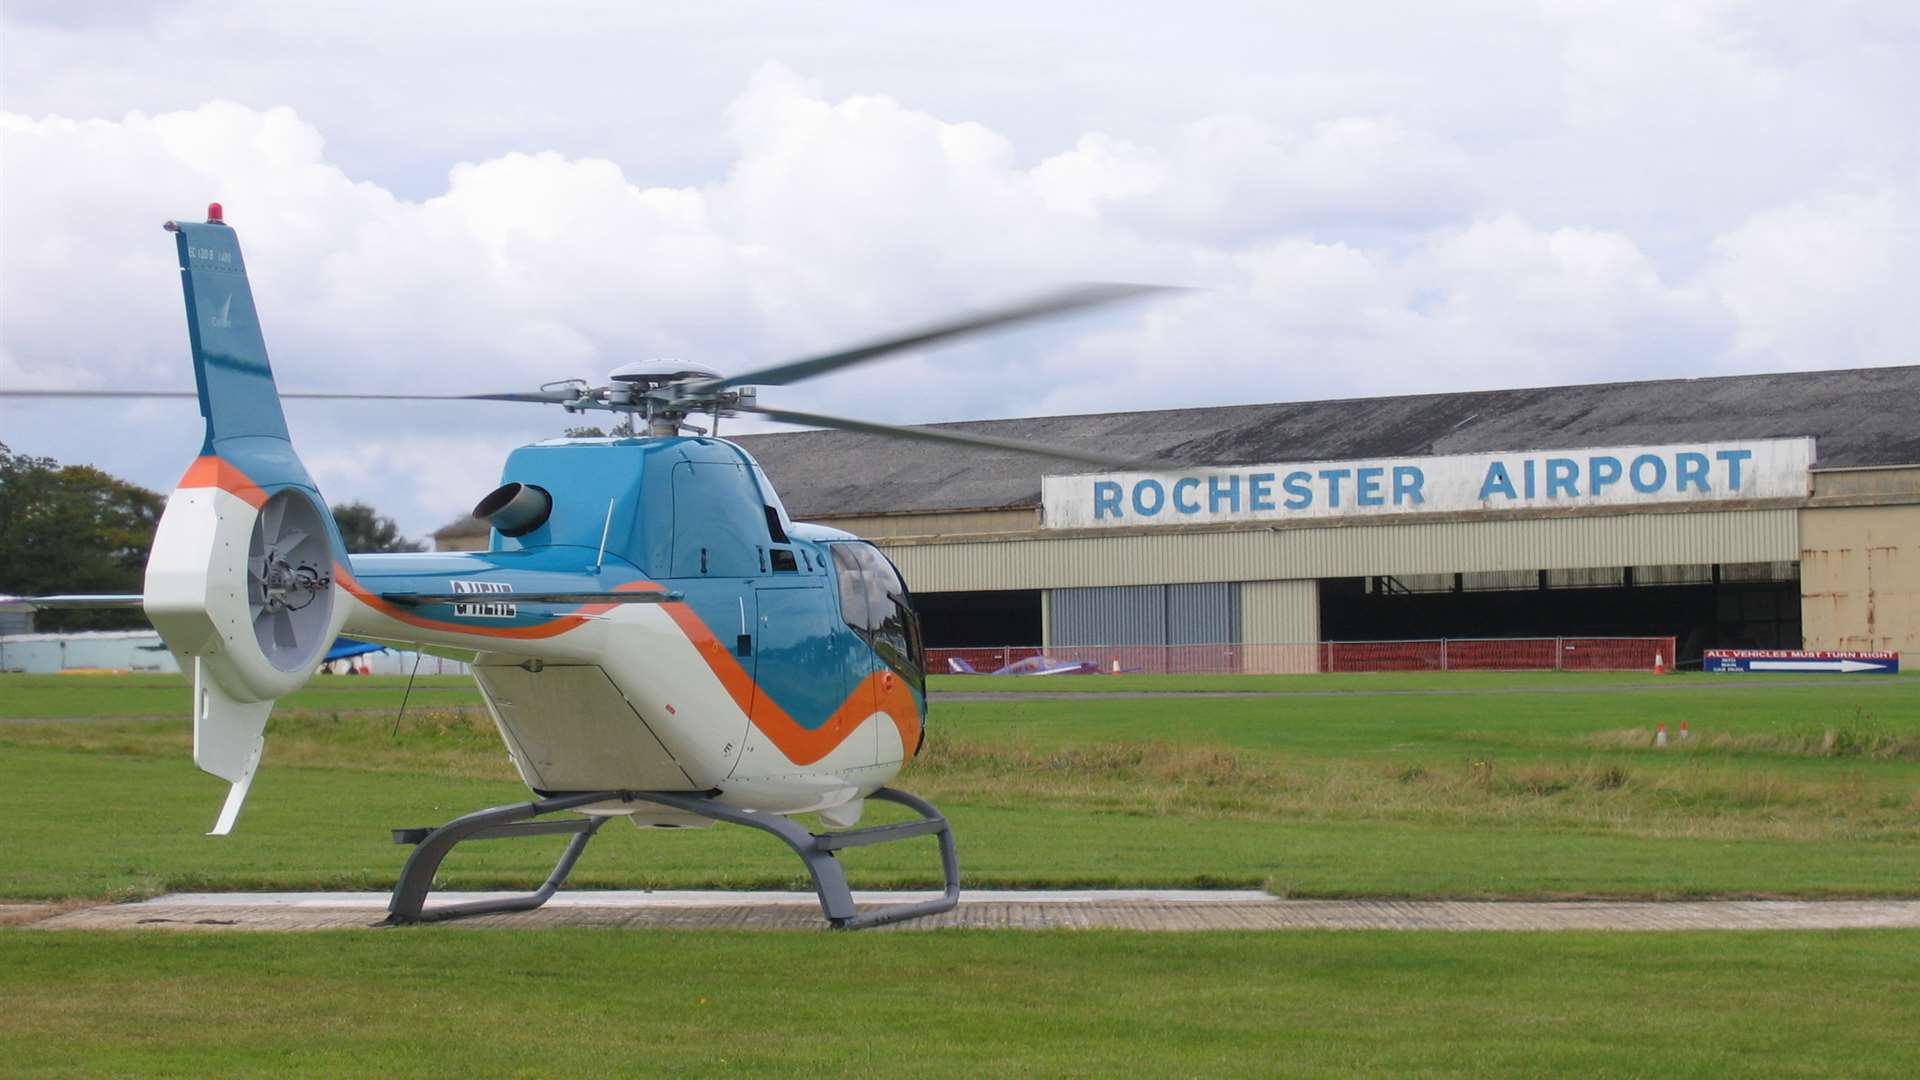 Rochester Airport Technology Hub will receive £3.7 million